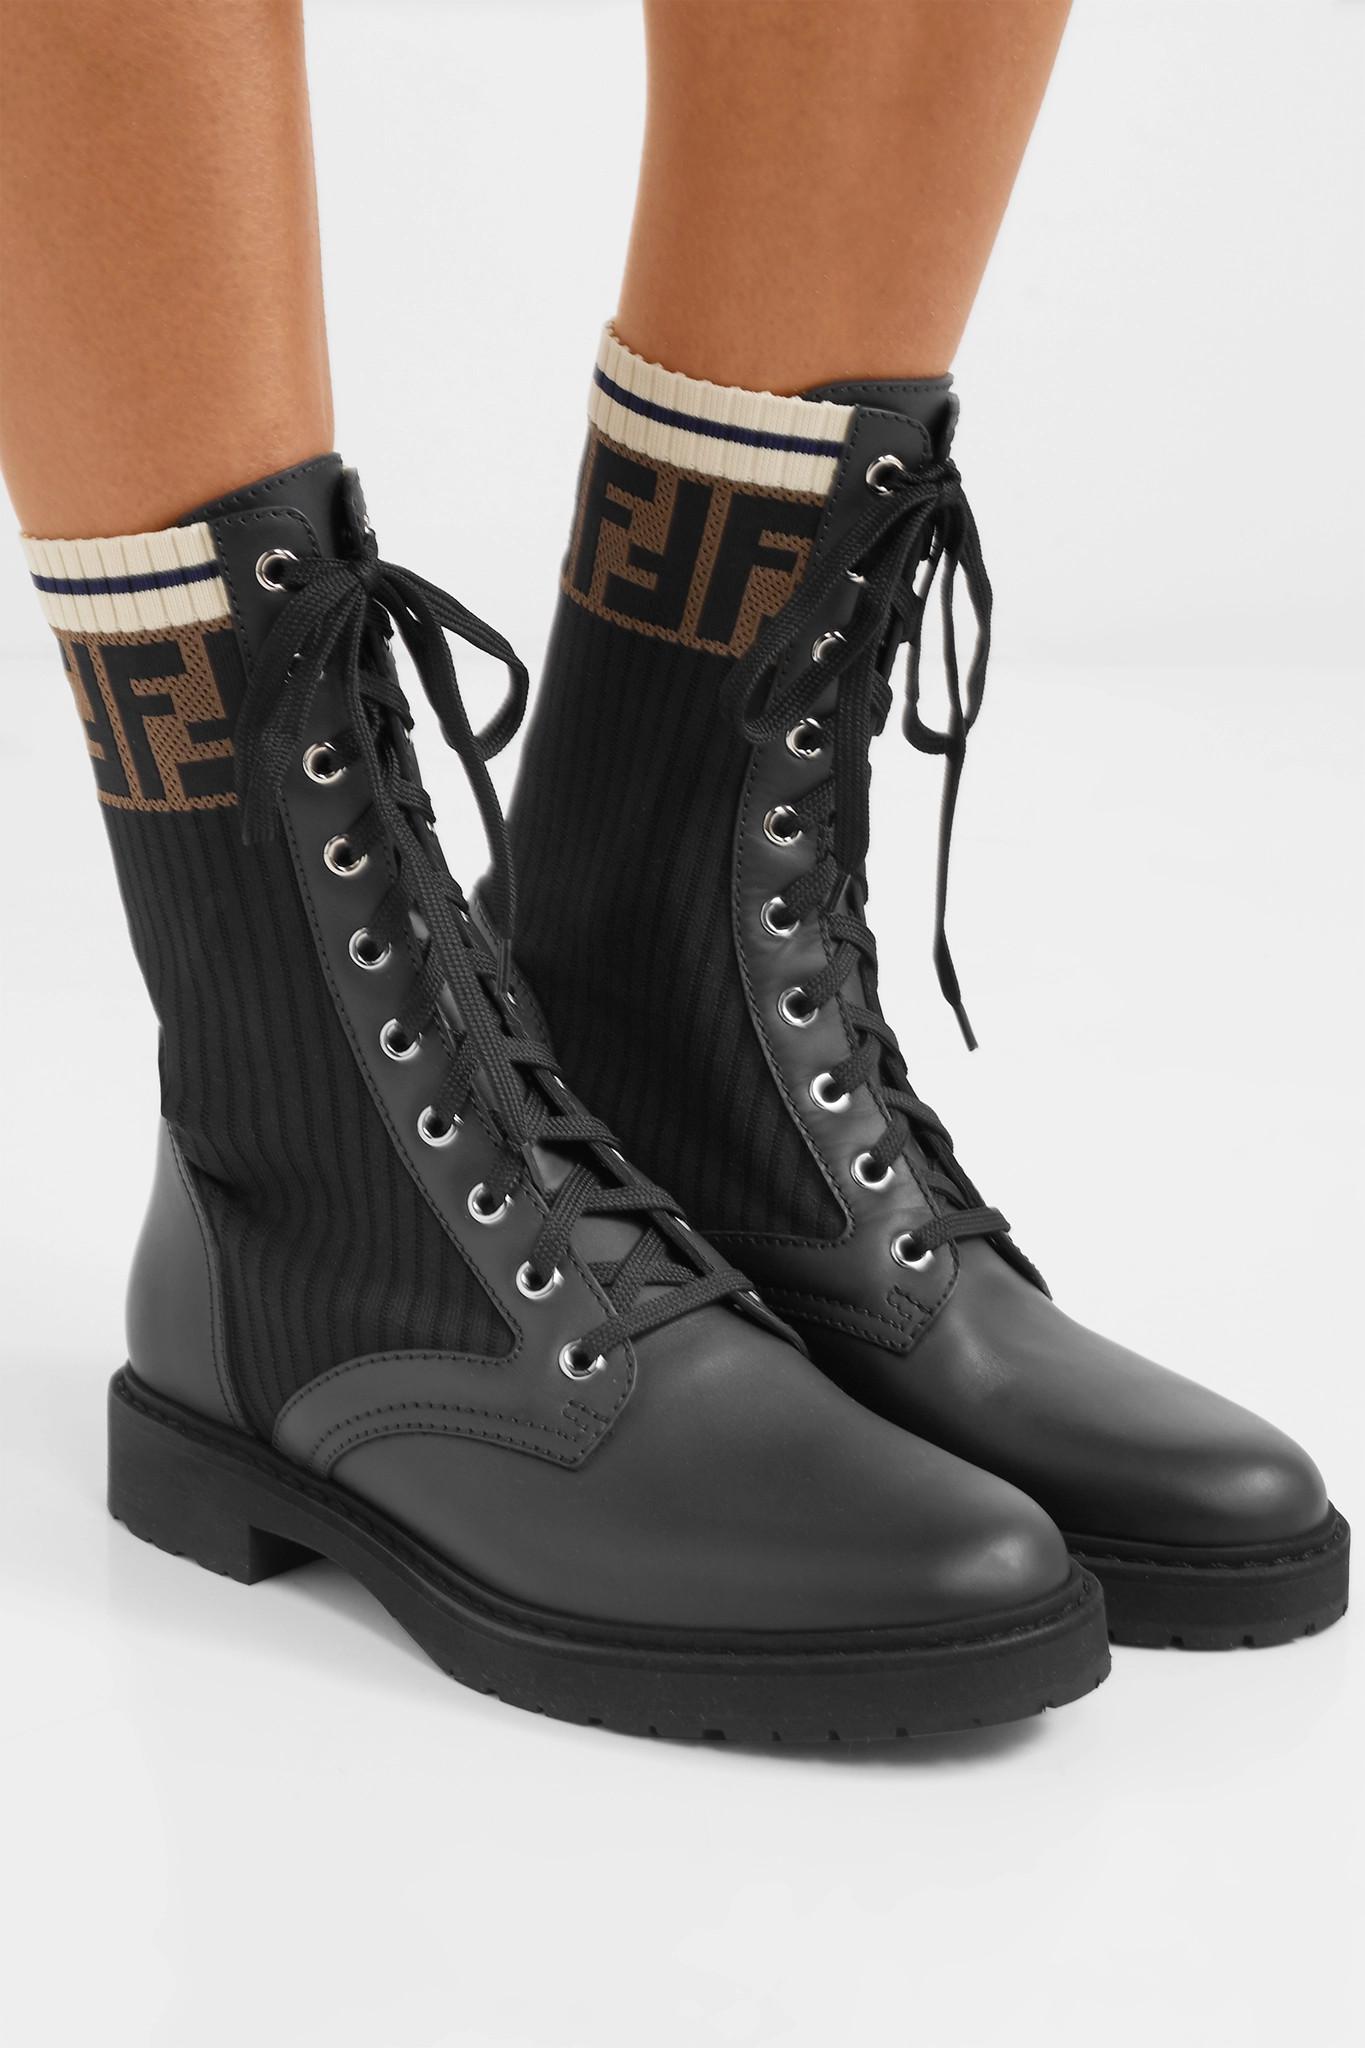 Fendi Denim Leather Ankle Boots in Black - Save 26% - Lyst